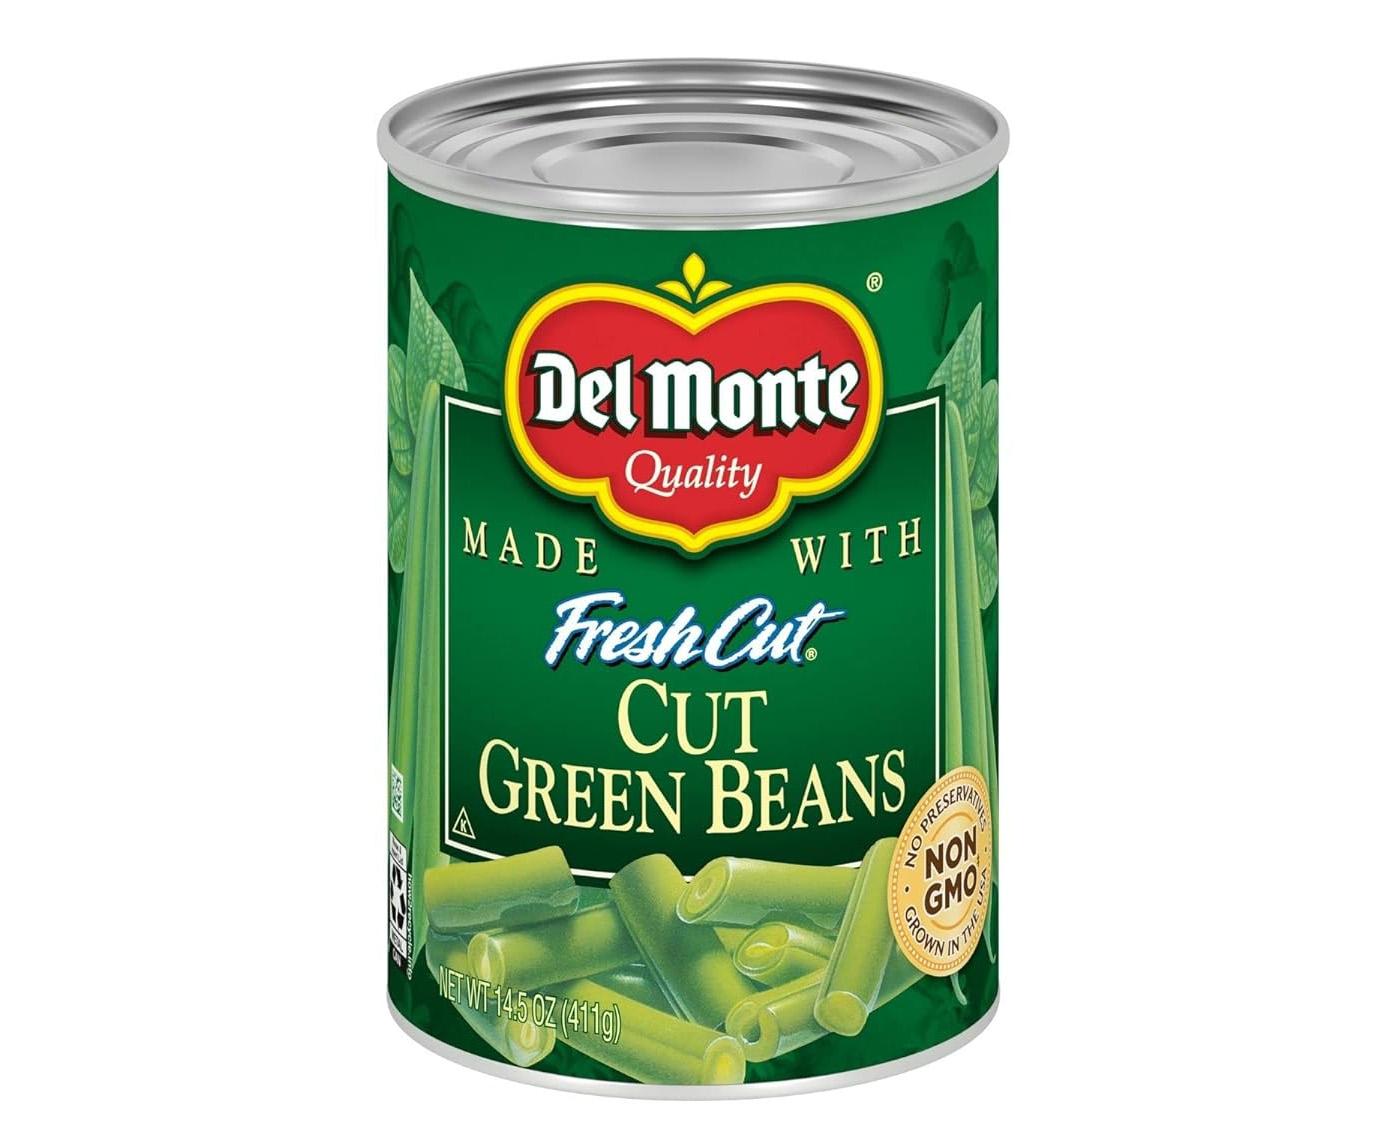 Del Monte Fresh Cut Blue Lake Canned Green Beans 12 Pack for $8.88